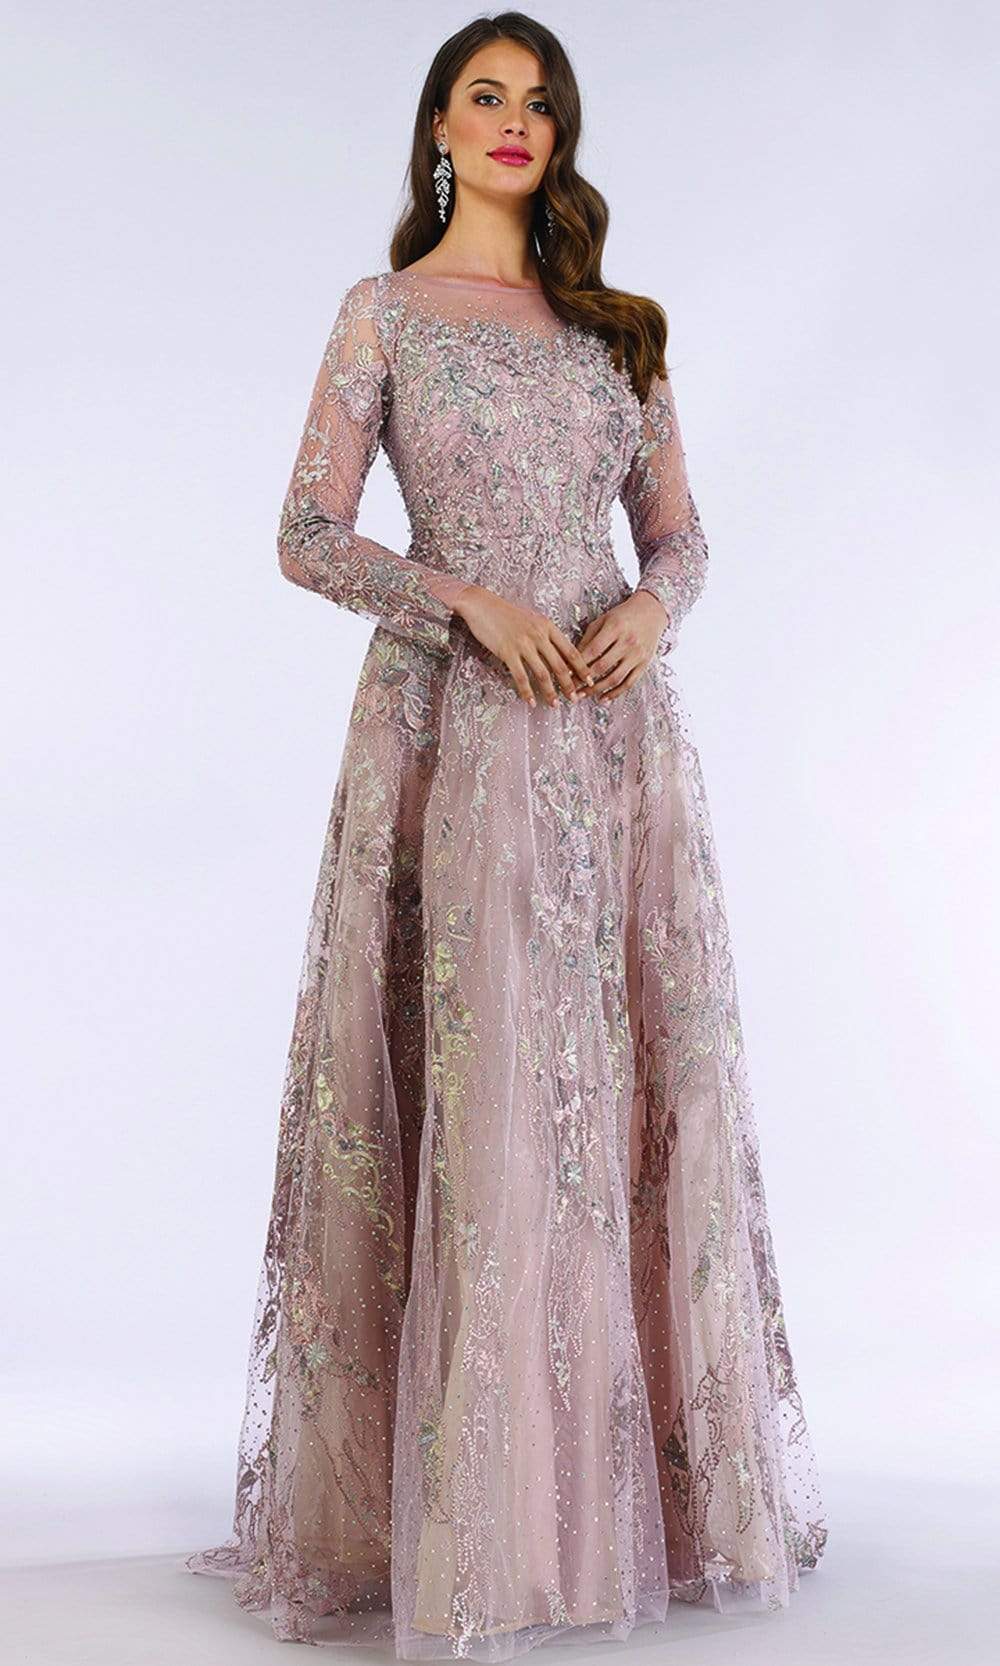 Lara Dresses - 29618 Illusion Long Sleeve Beaded Adorned Evening Gown Mother of the Bride Dresses 4 / Mauve